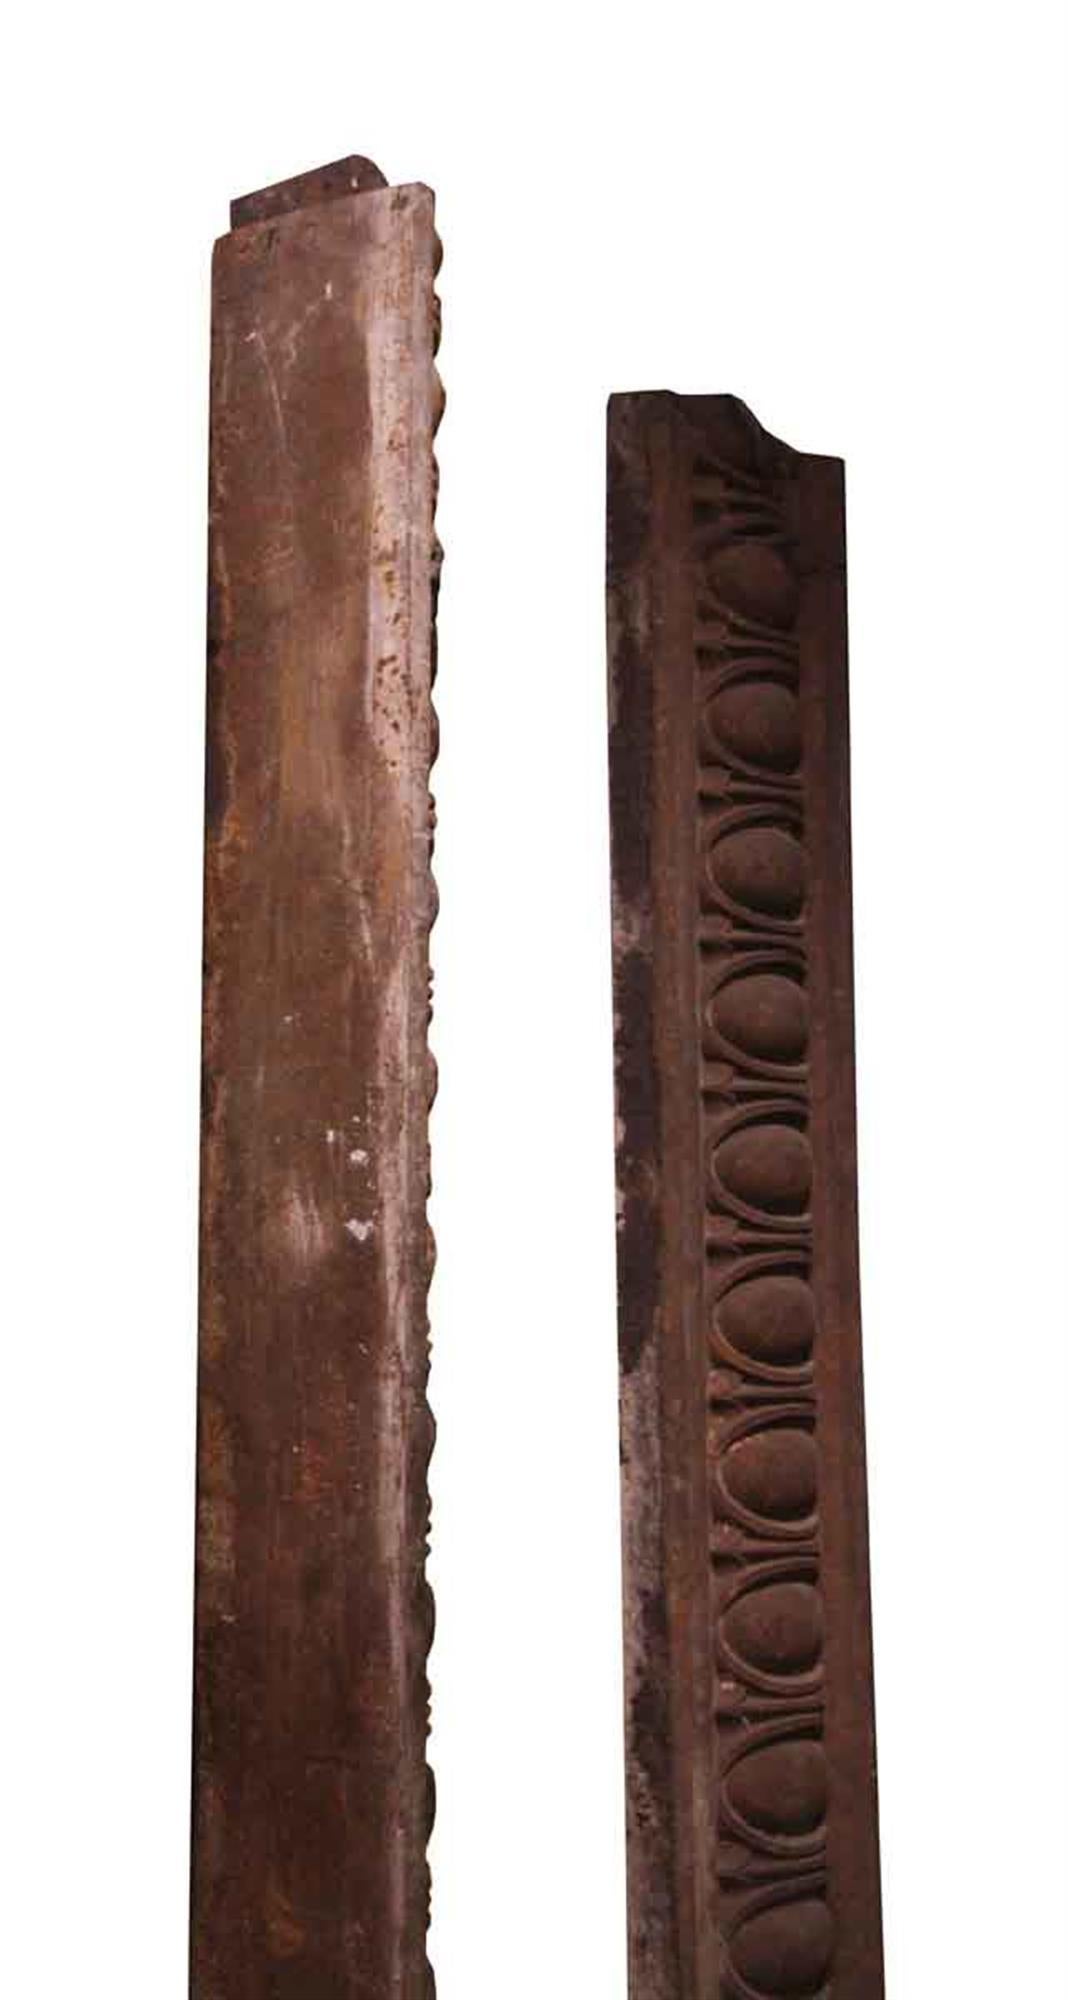 American 1880s Pair of Cast Iron Lintels or Roof Trim with Egg and Dart Design